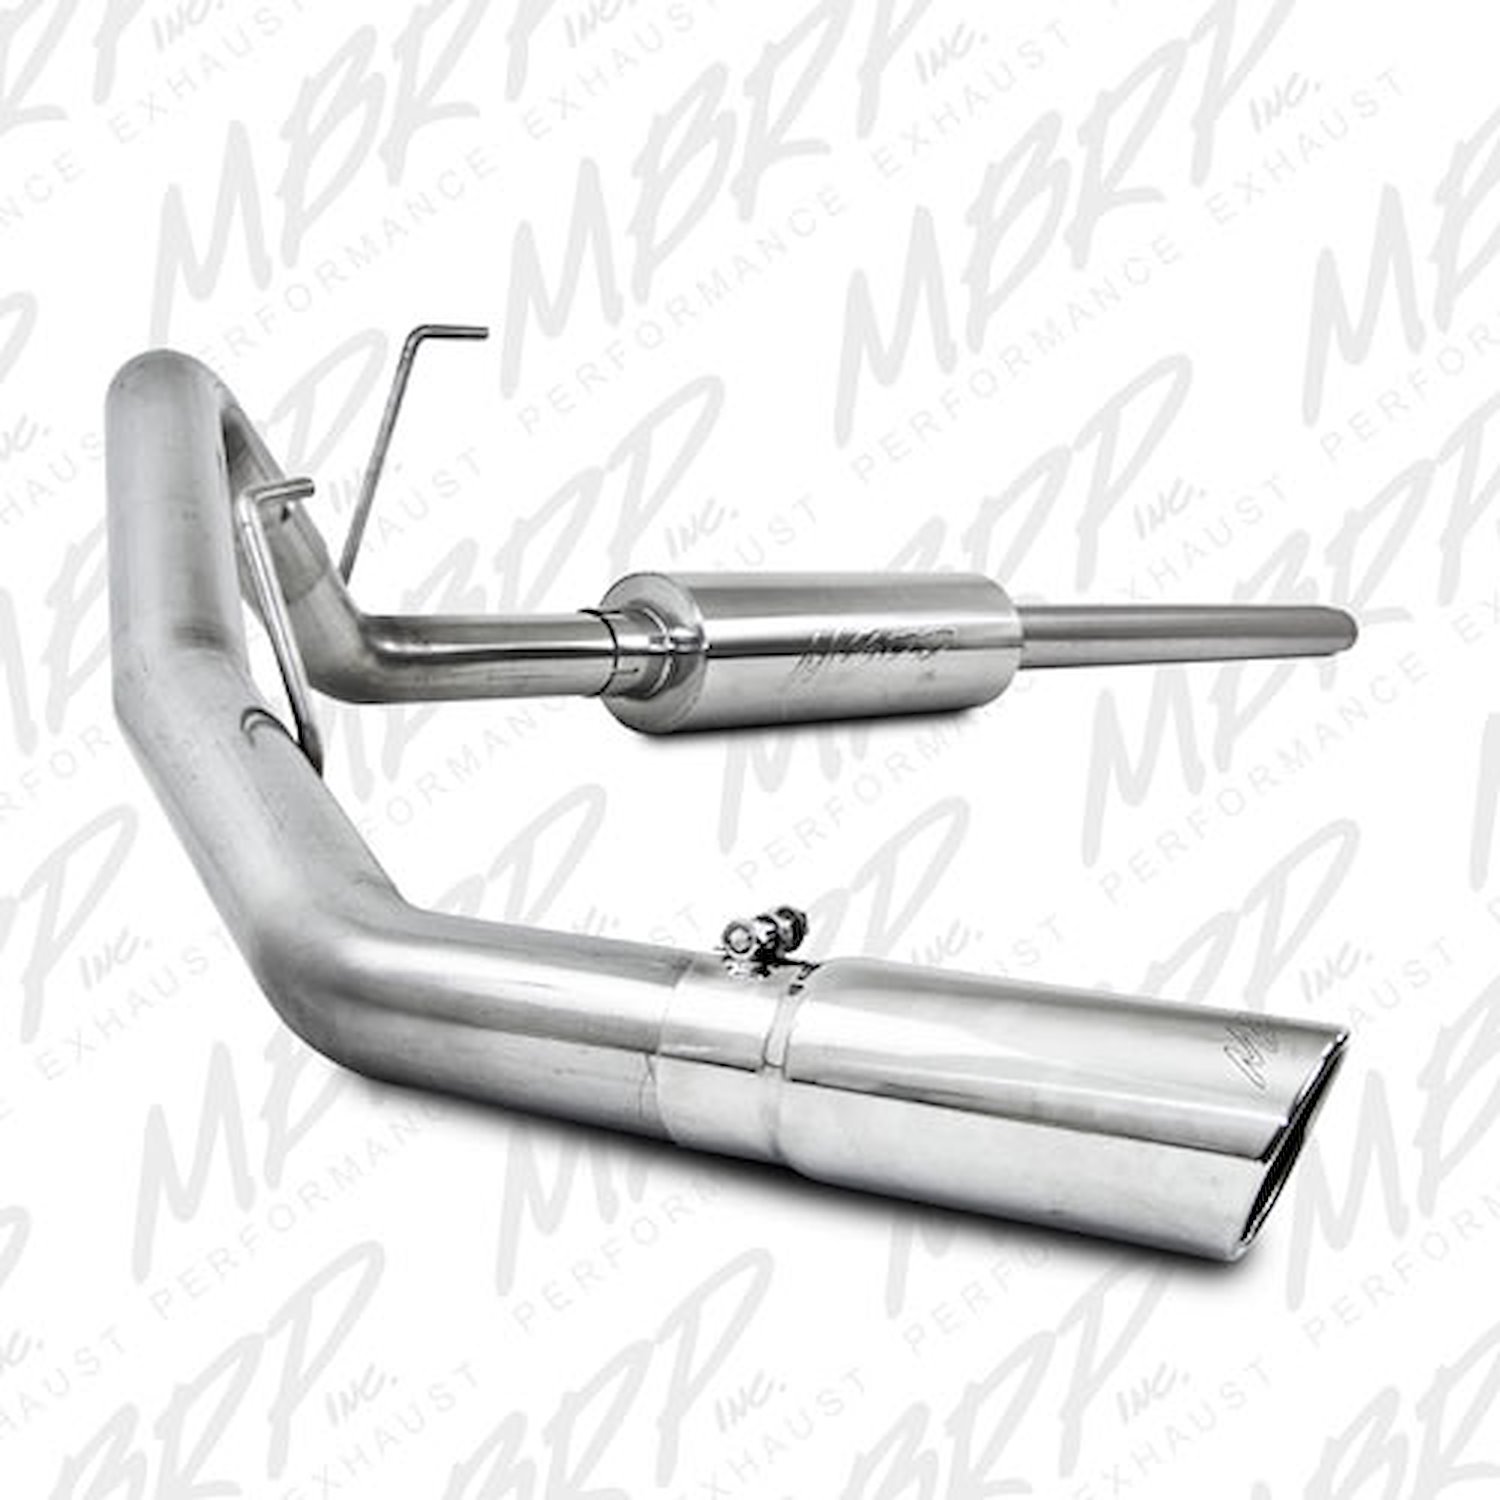 XP Series Exhaust System 2004-2008 Ford F-150 4.6/5.4L